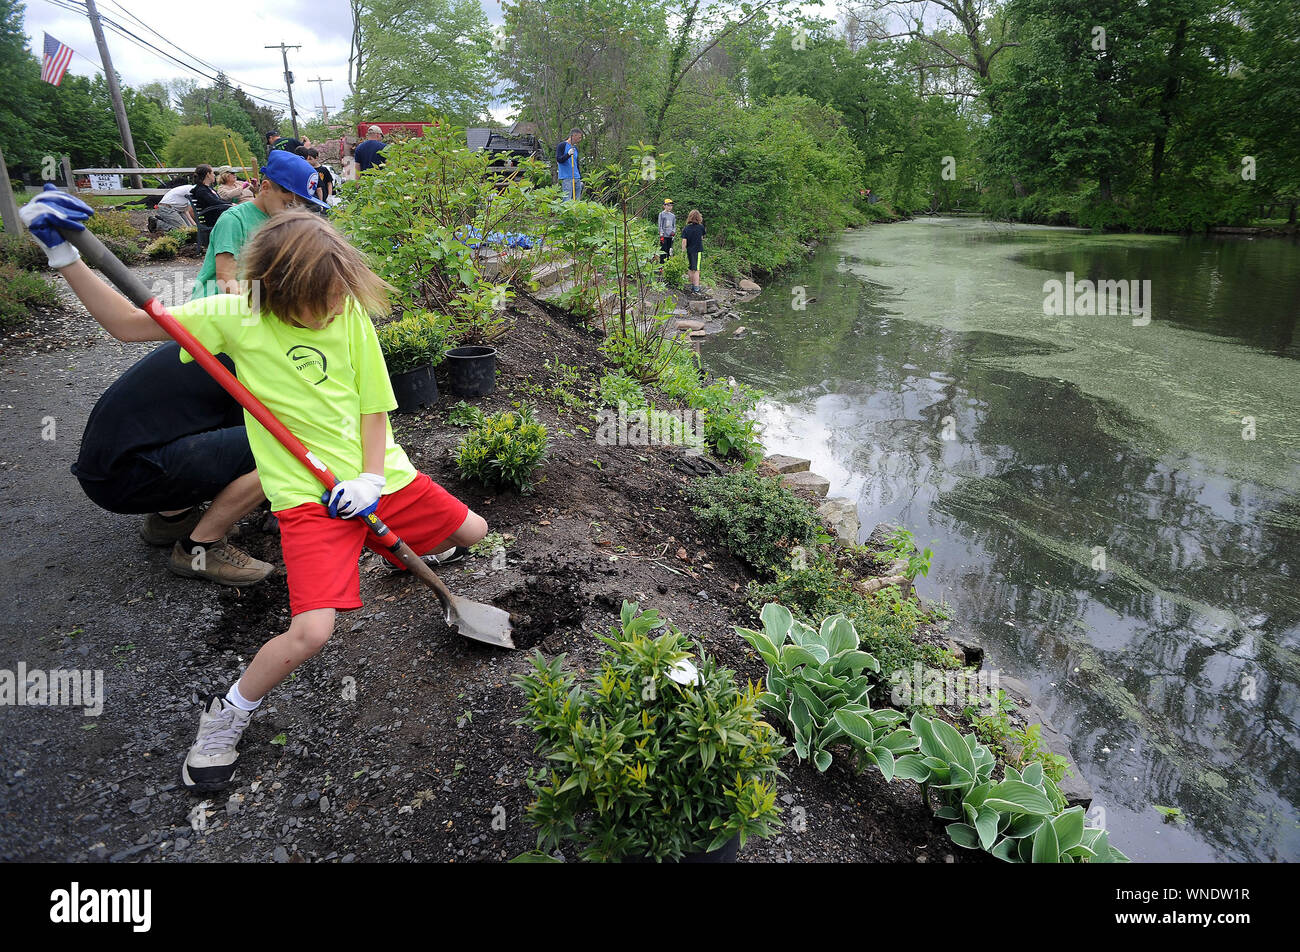 Lukas Ricciardi, of Yardley, Pennsylvania digs a hole to plant a shrub during a community cleanup of Lake Afton to provide some relief for the algae-p Stock Photo